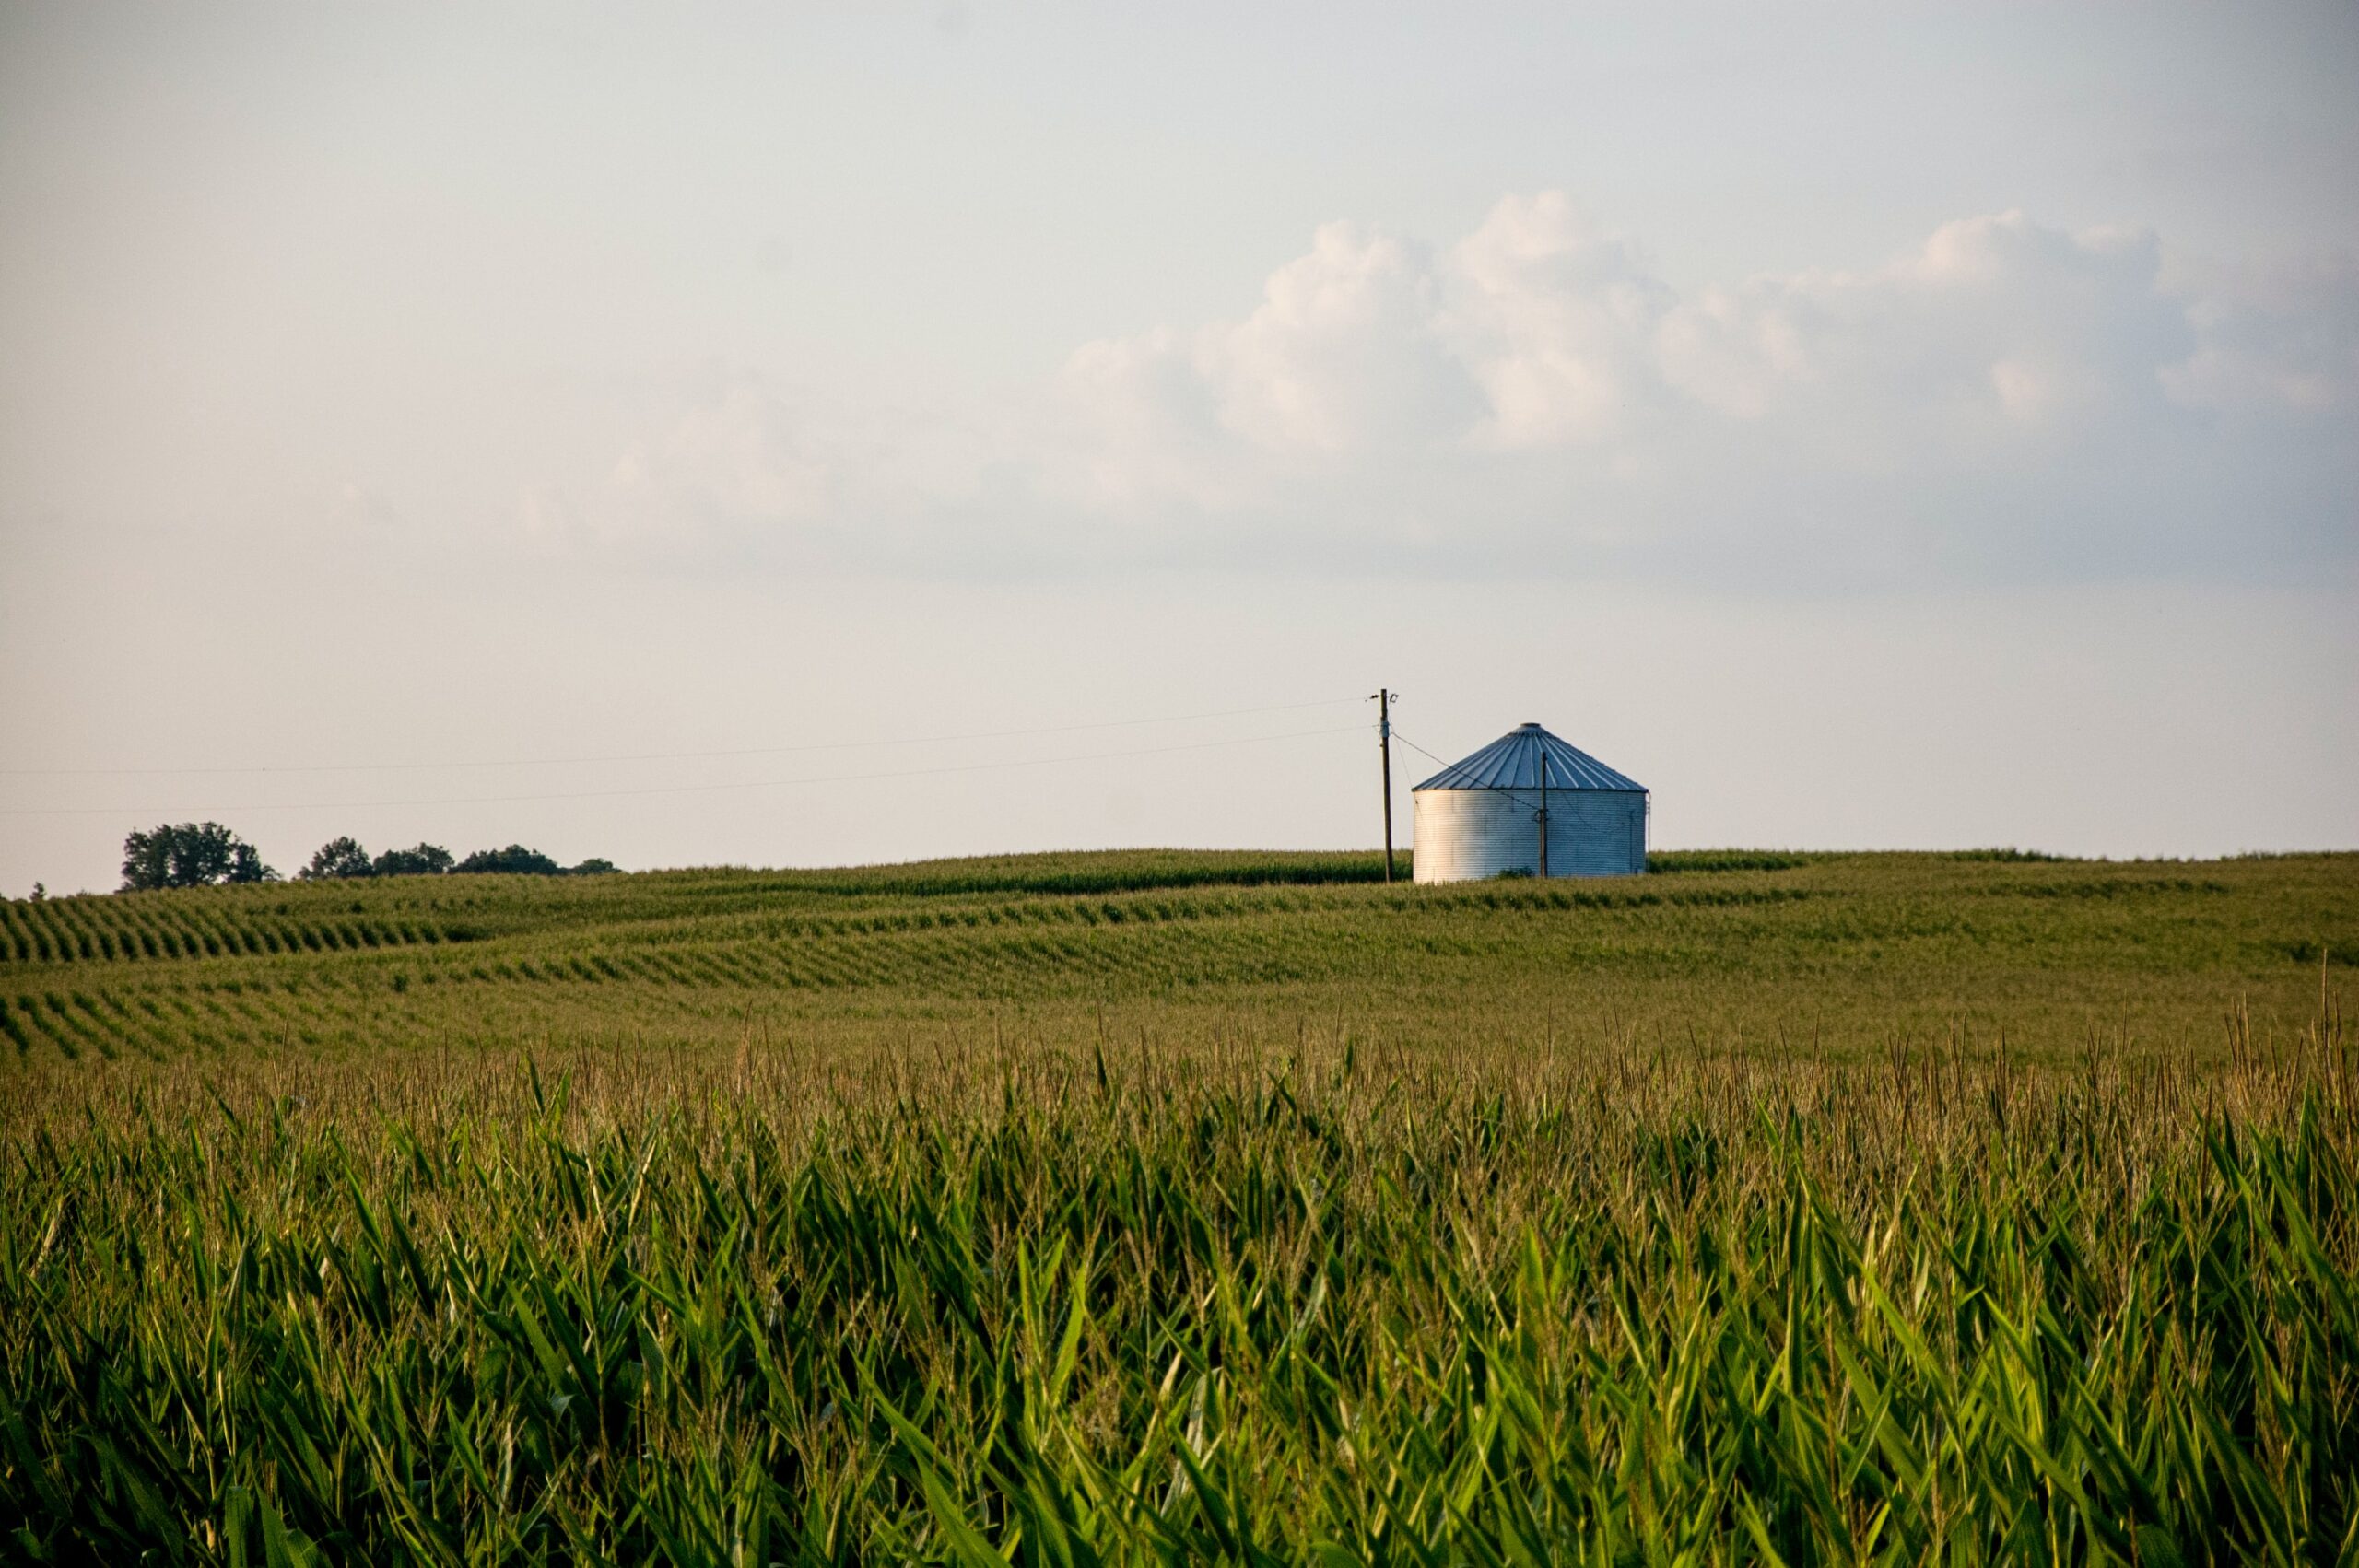 A field and silo in Kentucky - Joshua Michaels for Unsplash